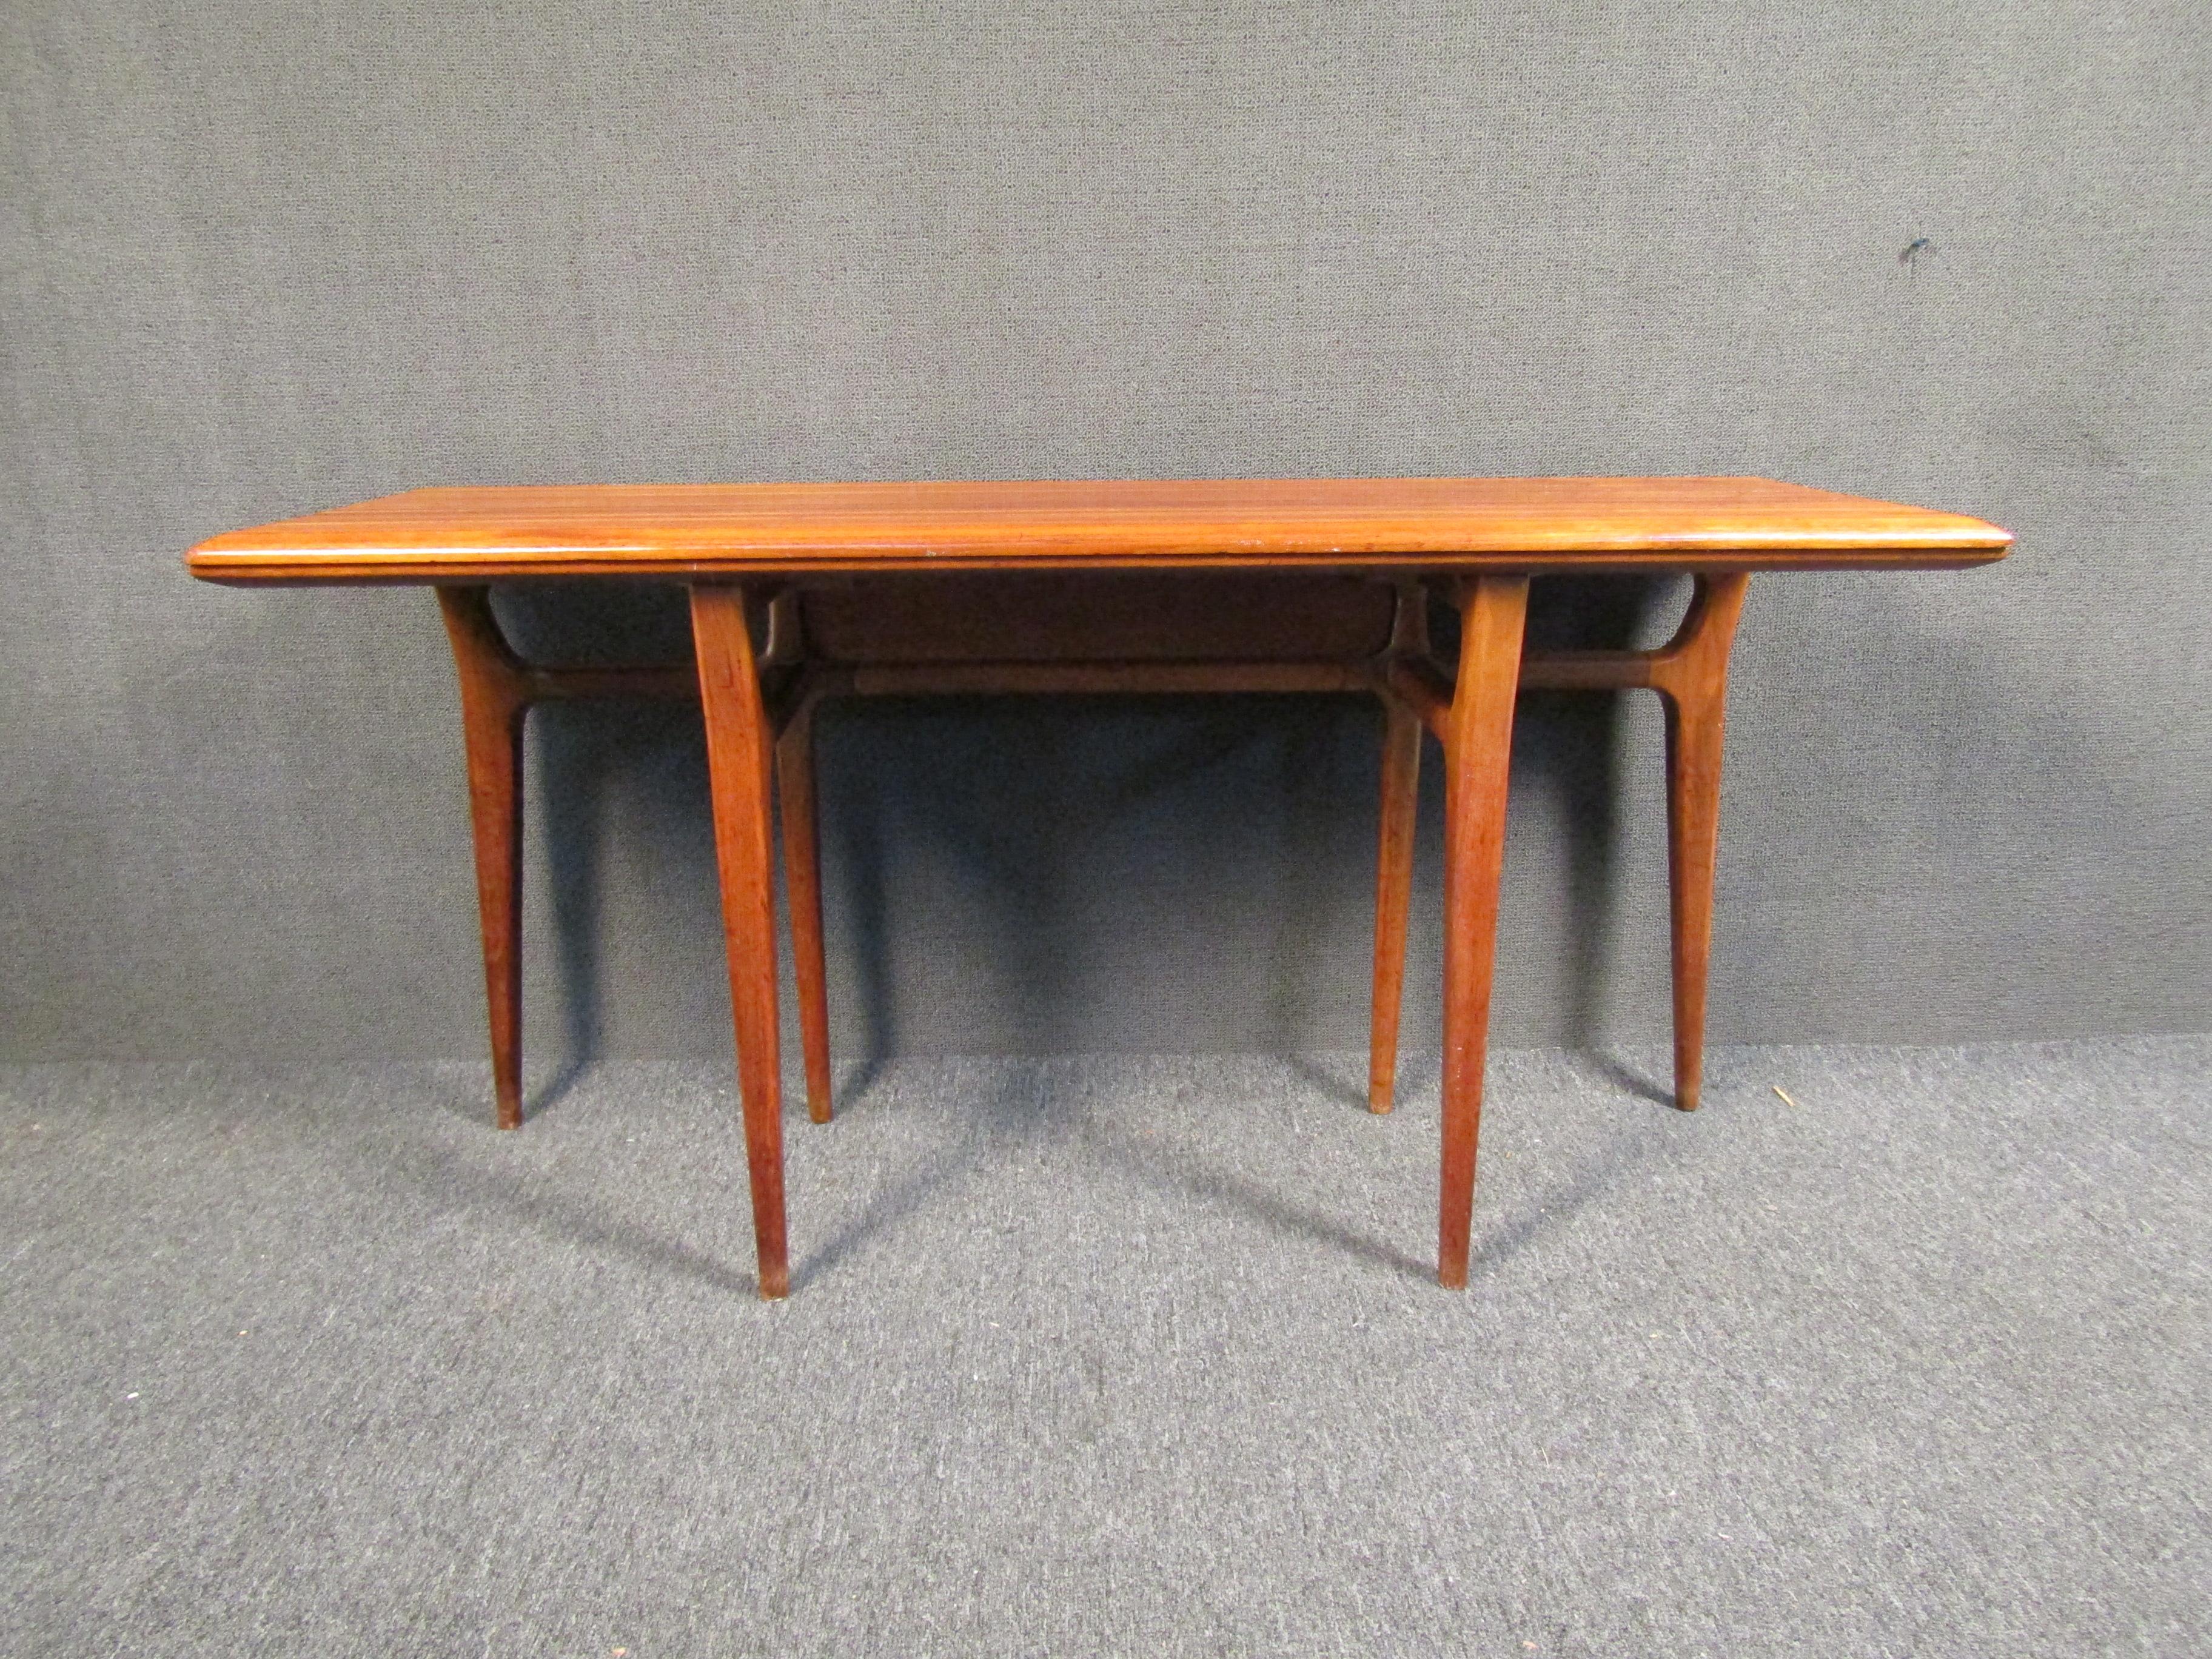 This gorgeous Mid-Century Modern console table folds out into a dining table, making it perfect for entertaining and easy to store as a hall table or side table. This table features sculpted legs and stunning wood grain. Perfect for any home or